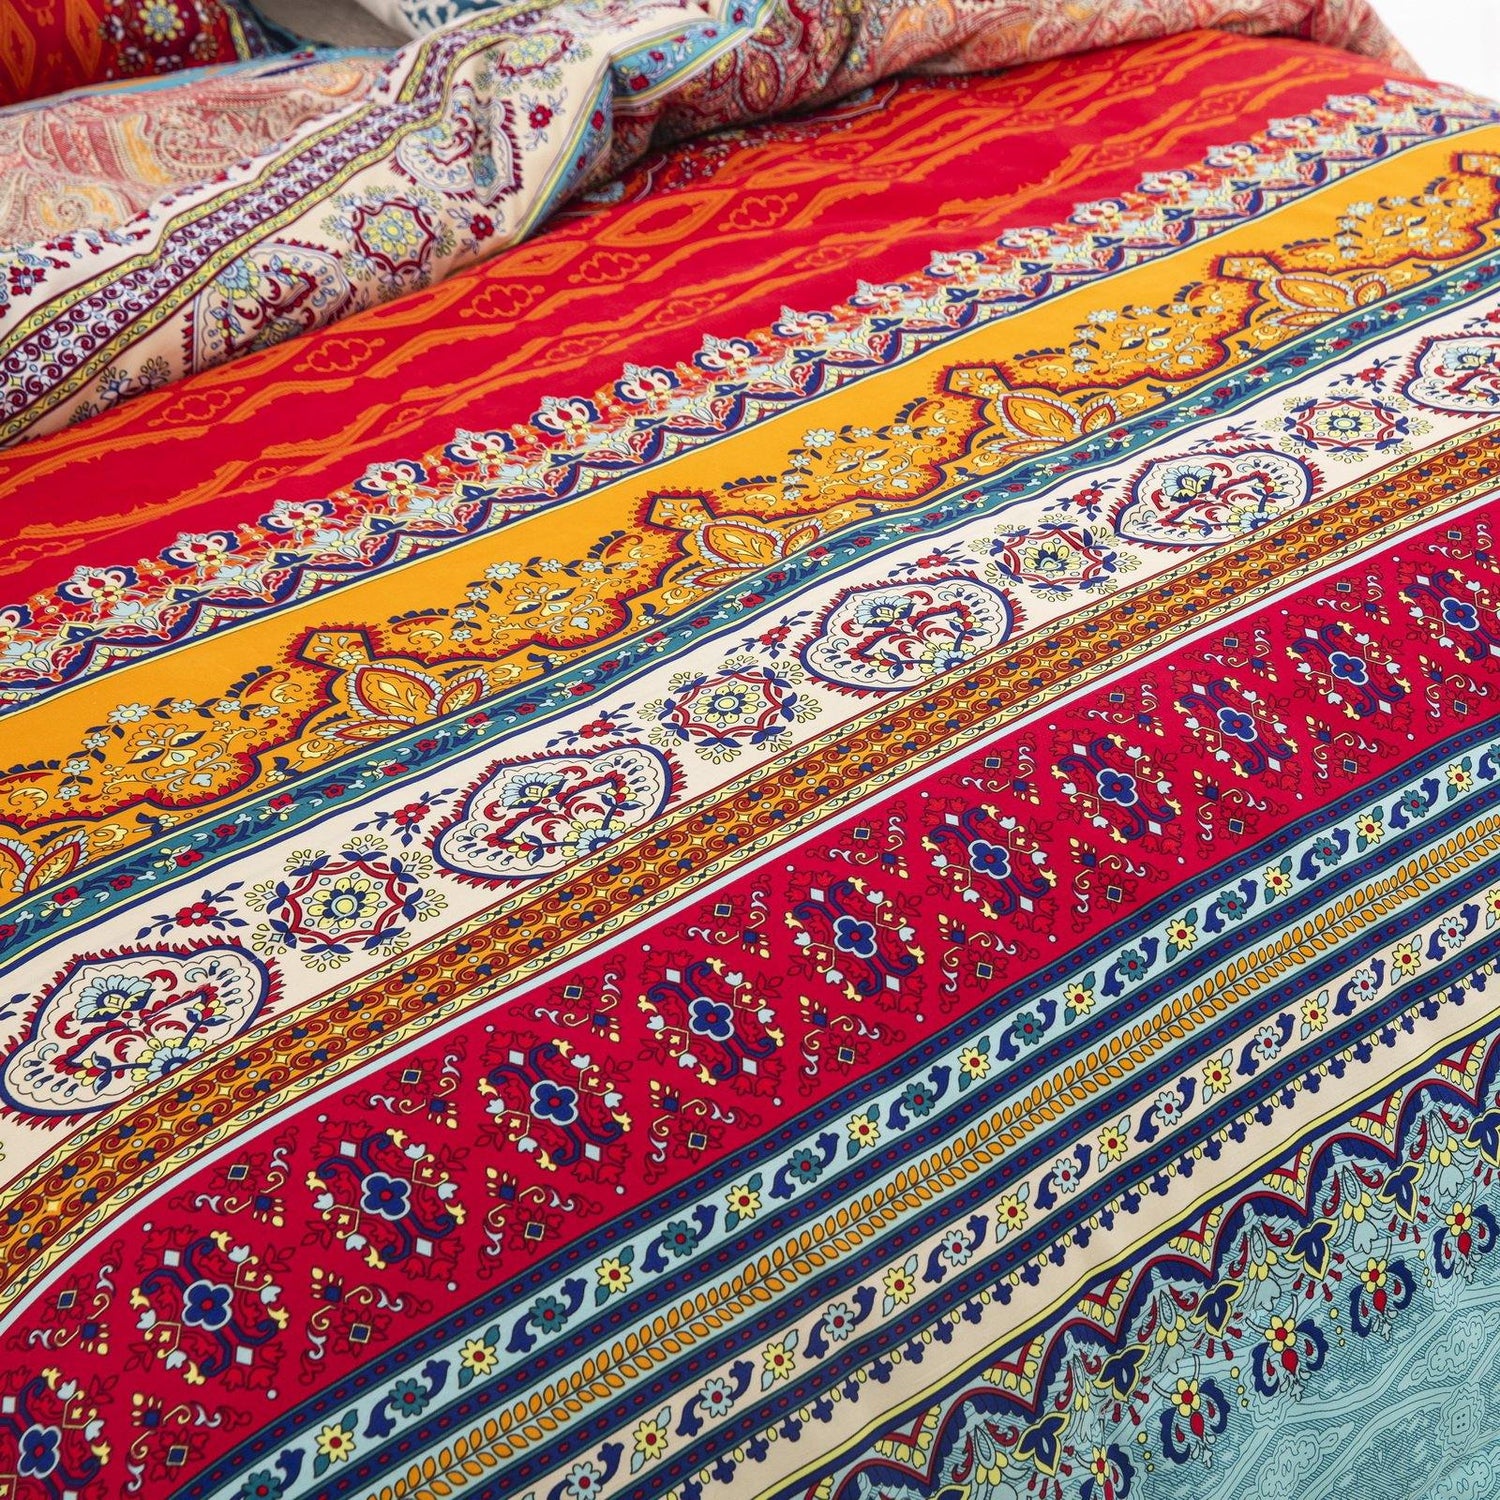 WONGS BEDDING Bohemian style Comforter set bedroom bedding 3 Pieces Bedding Comforter with 2 Pillow Cases suitable for the whole season - Wongs bedding